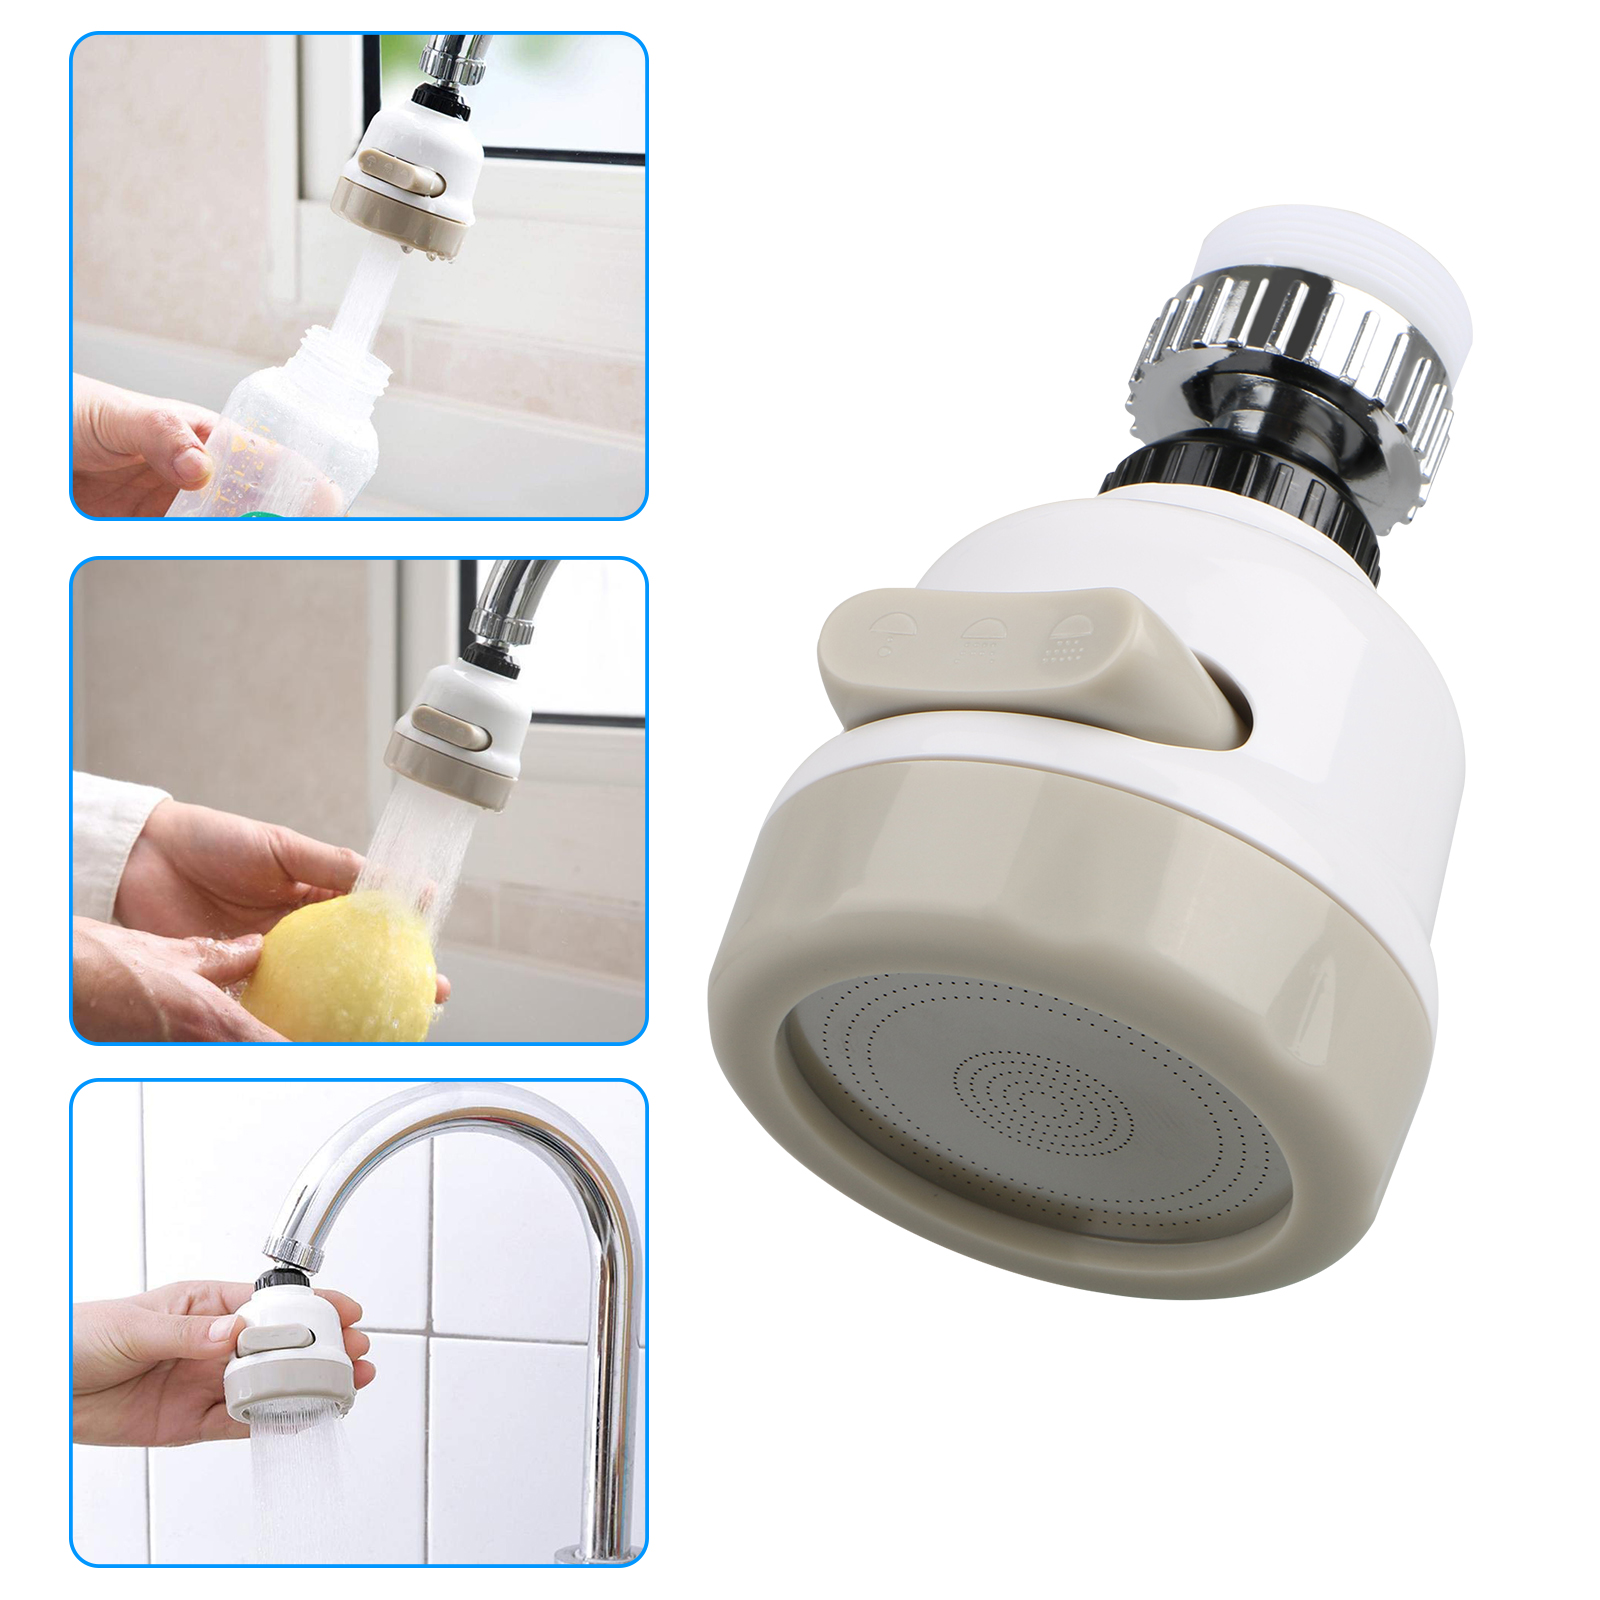 Kitchen Sink Faucet Spray Head 360swivel Pull Out Spray Head Replacement Part 715444535079 Ebay